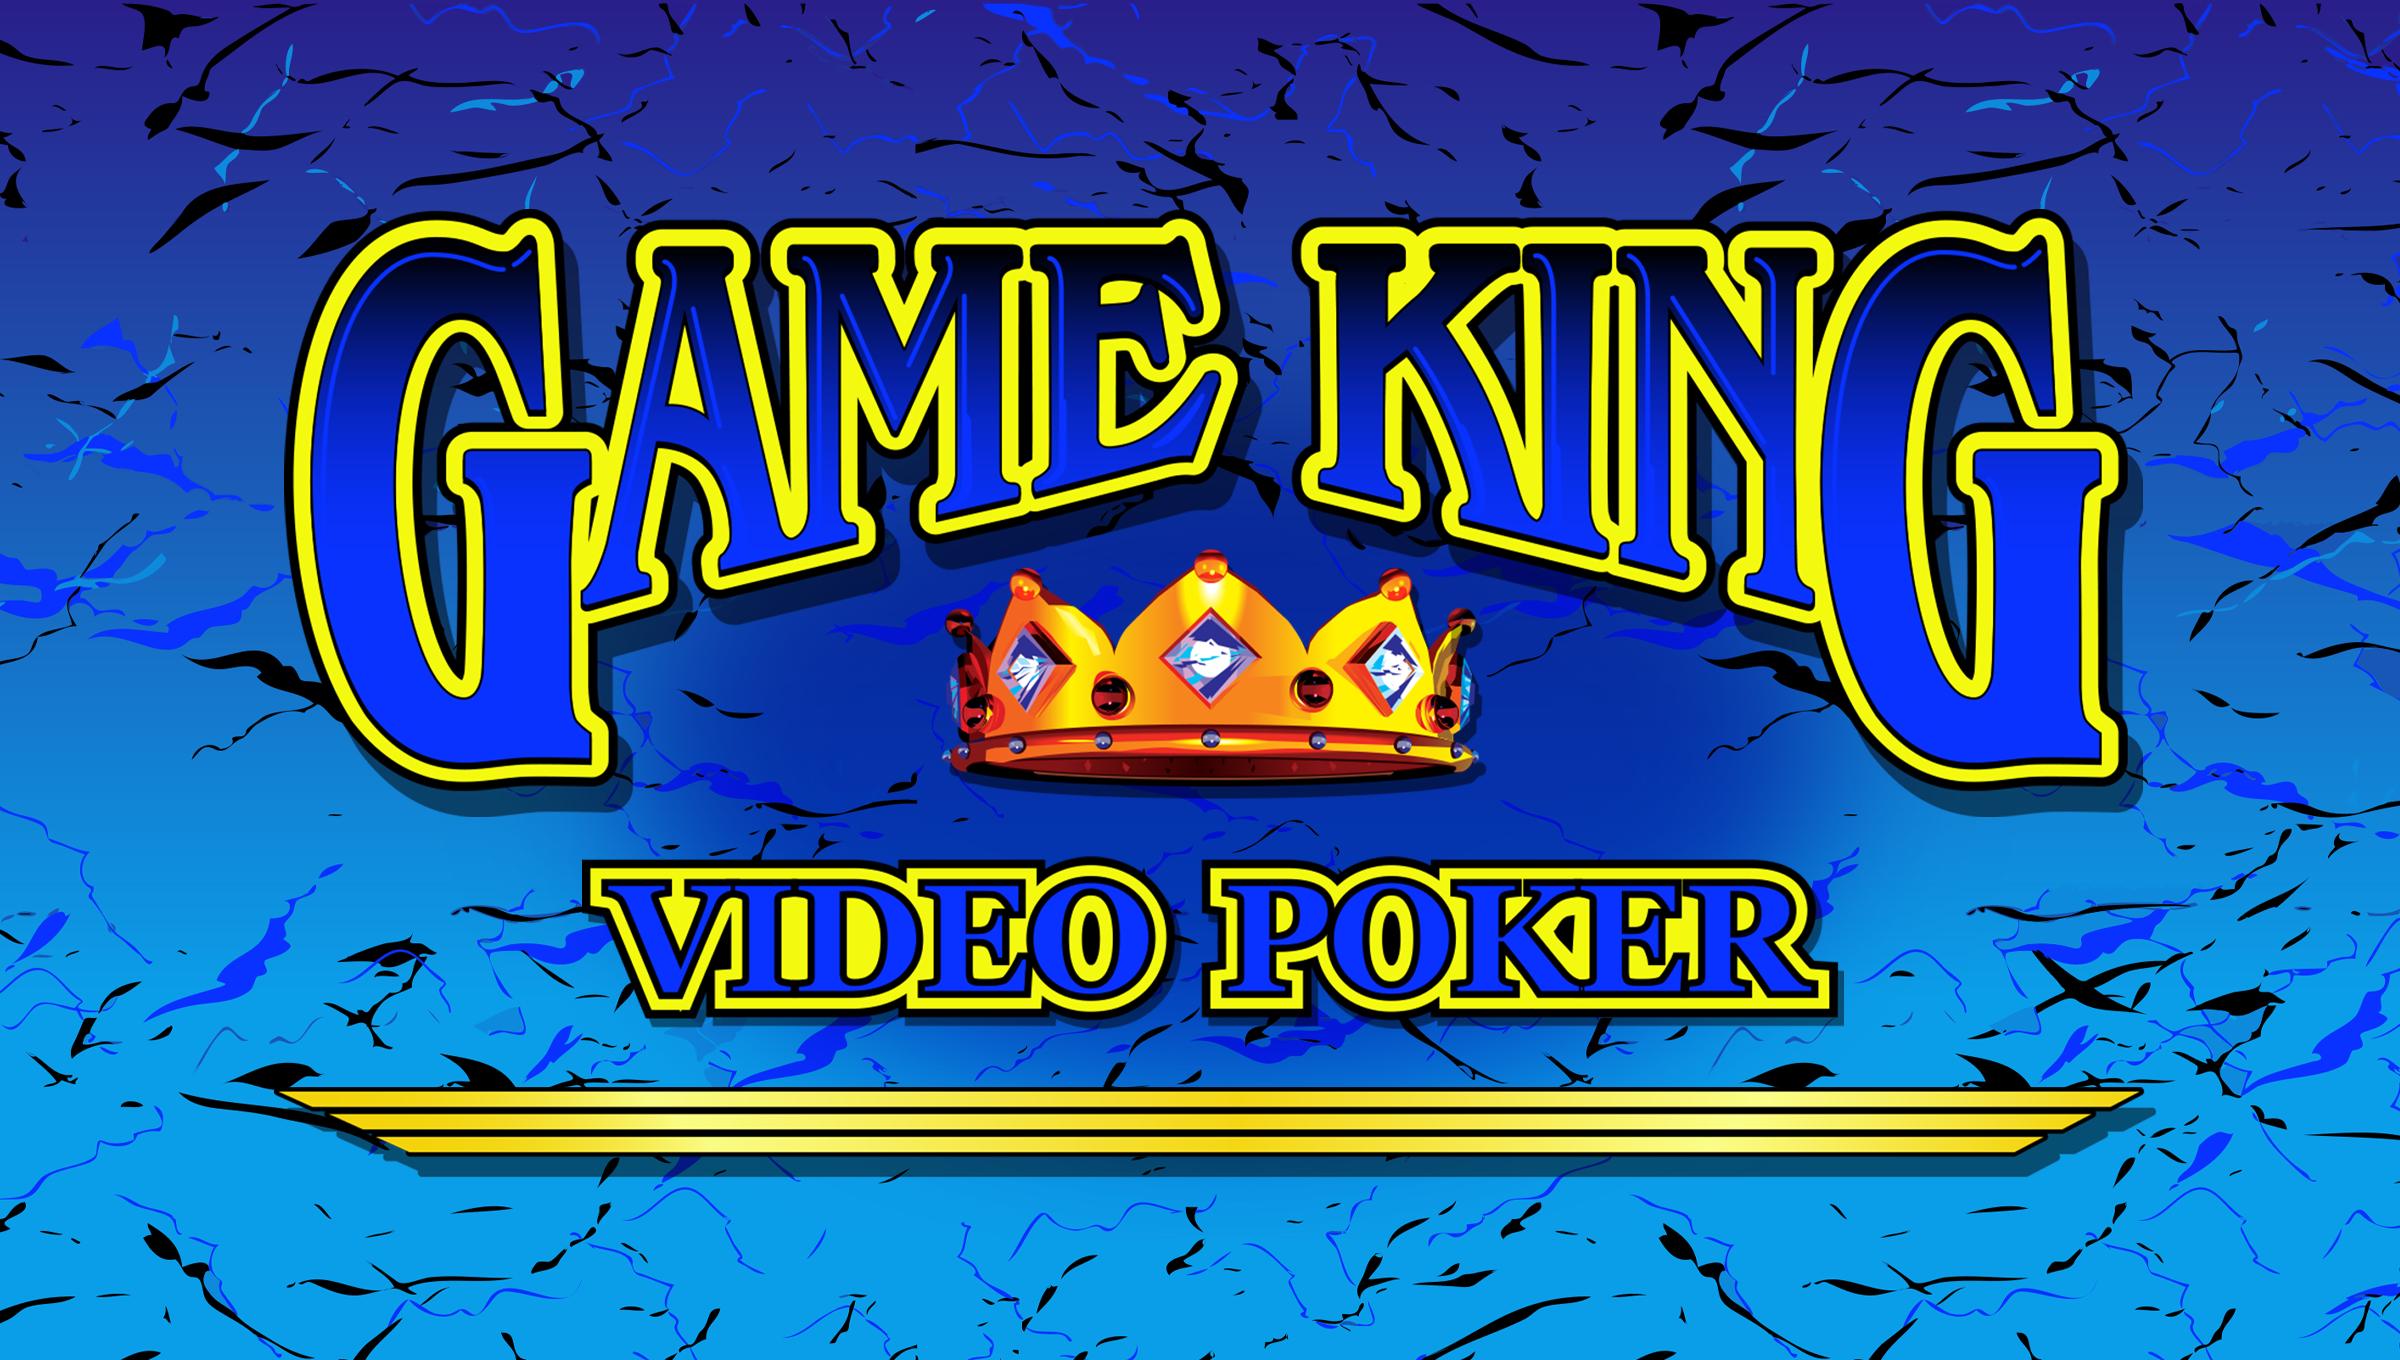 Purchase Your Favorite Game at GameKing with Multi Game Card